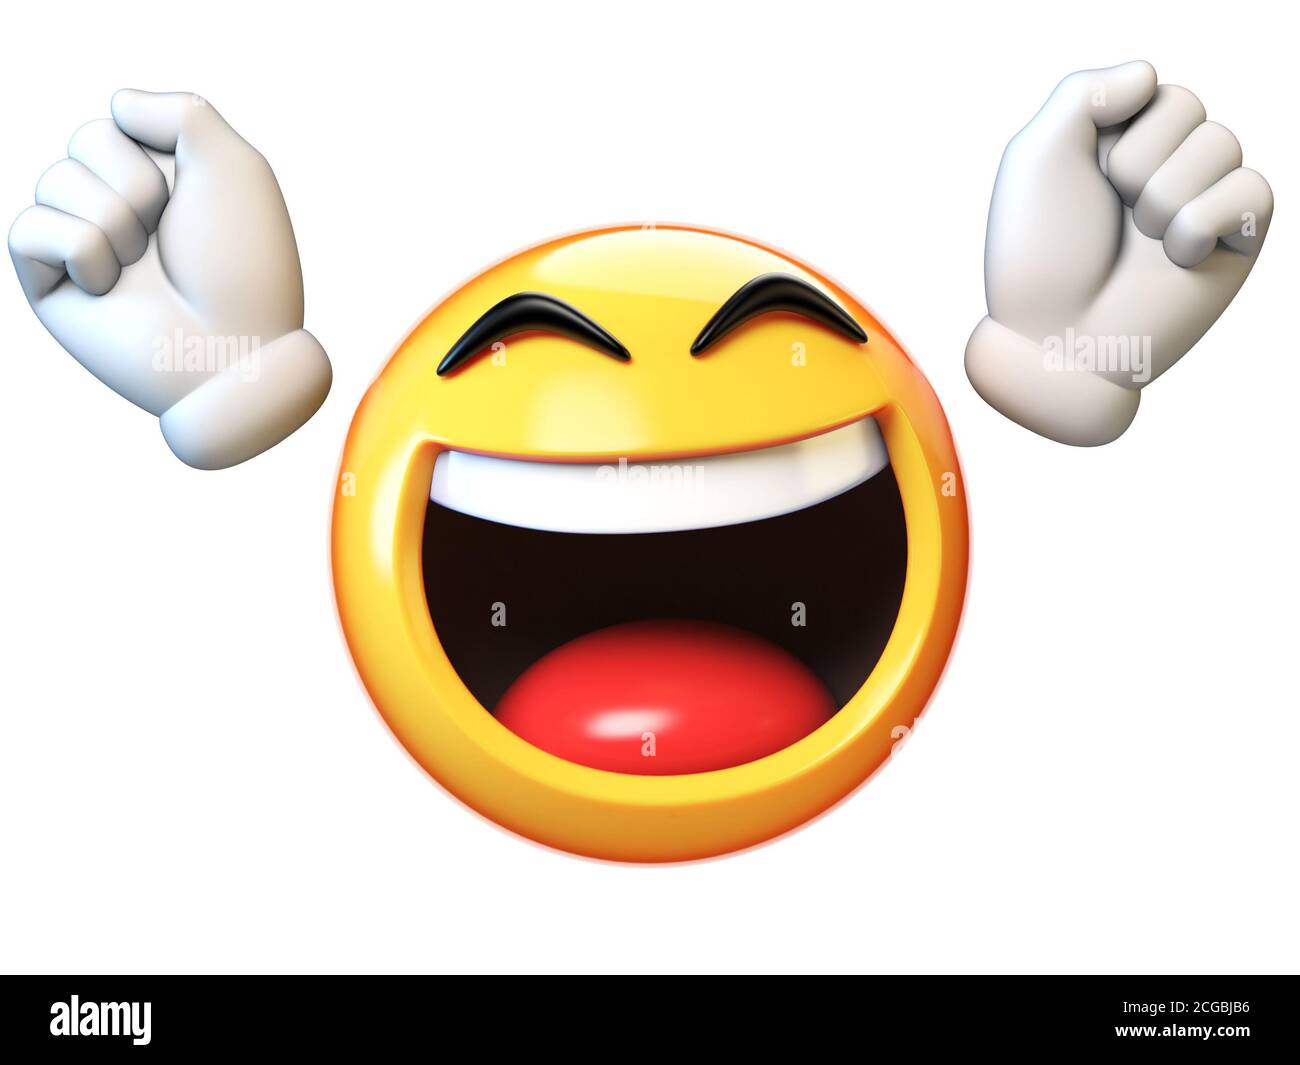 3dRose Single Toggle Switch face picture of happy emoji on white background lsp_265895_1